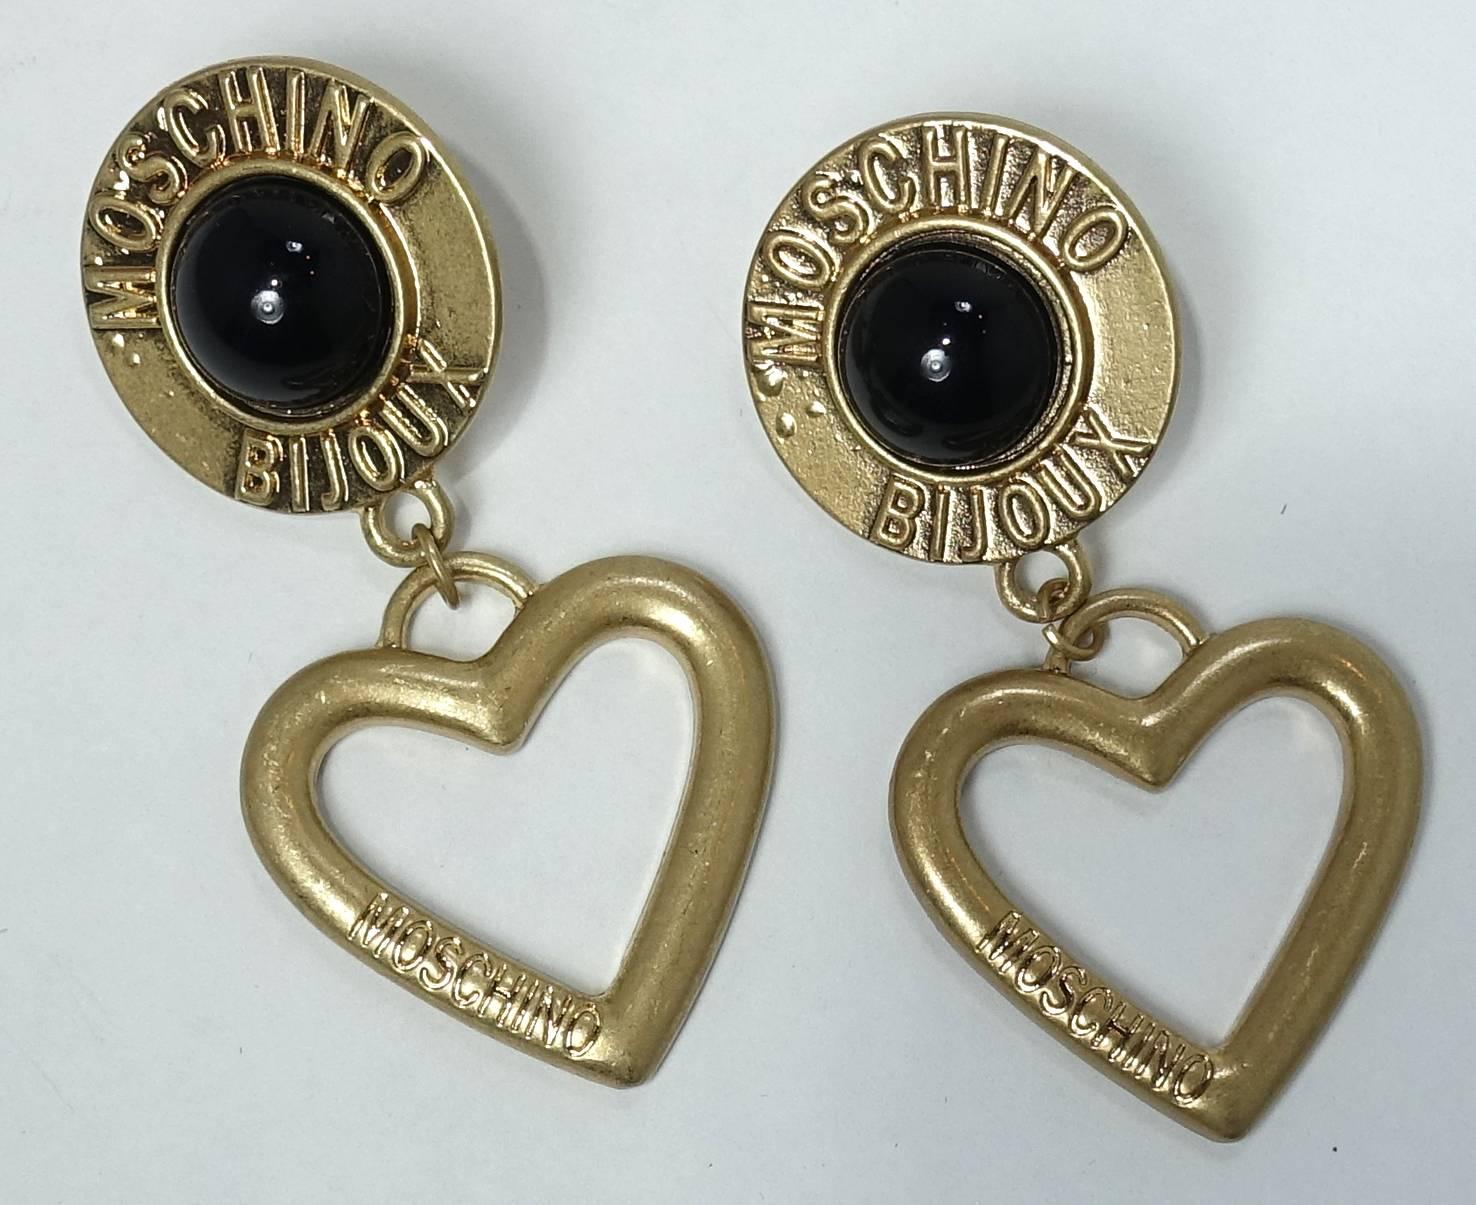 These vintage Moschino earrings feature the top with a faux onyx cabochon center with the gold tone outside saying Moschino Bijoux .  Attached to the top is a dangling heart with the name “Moschino” engraved on the side of the heart.   These pierced